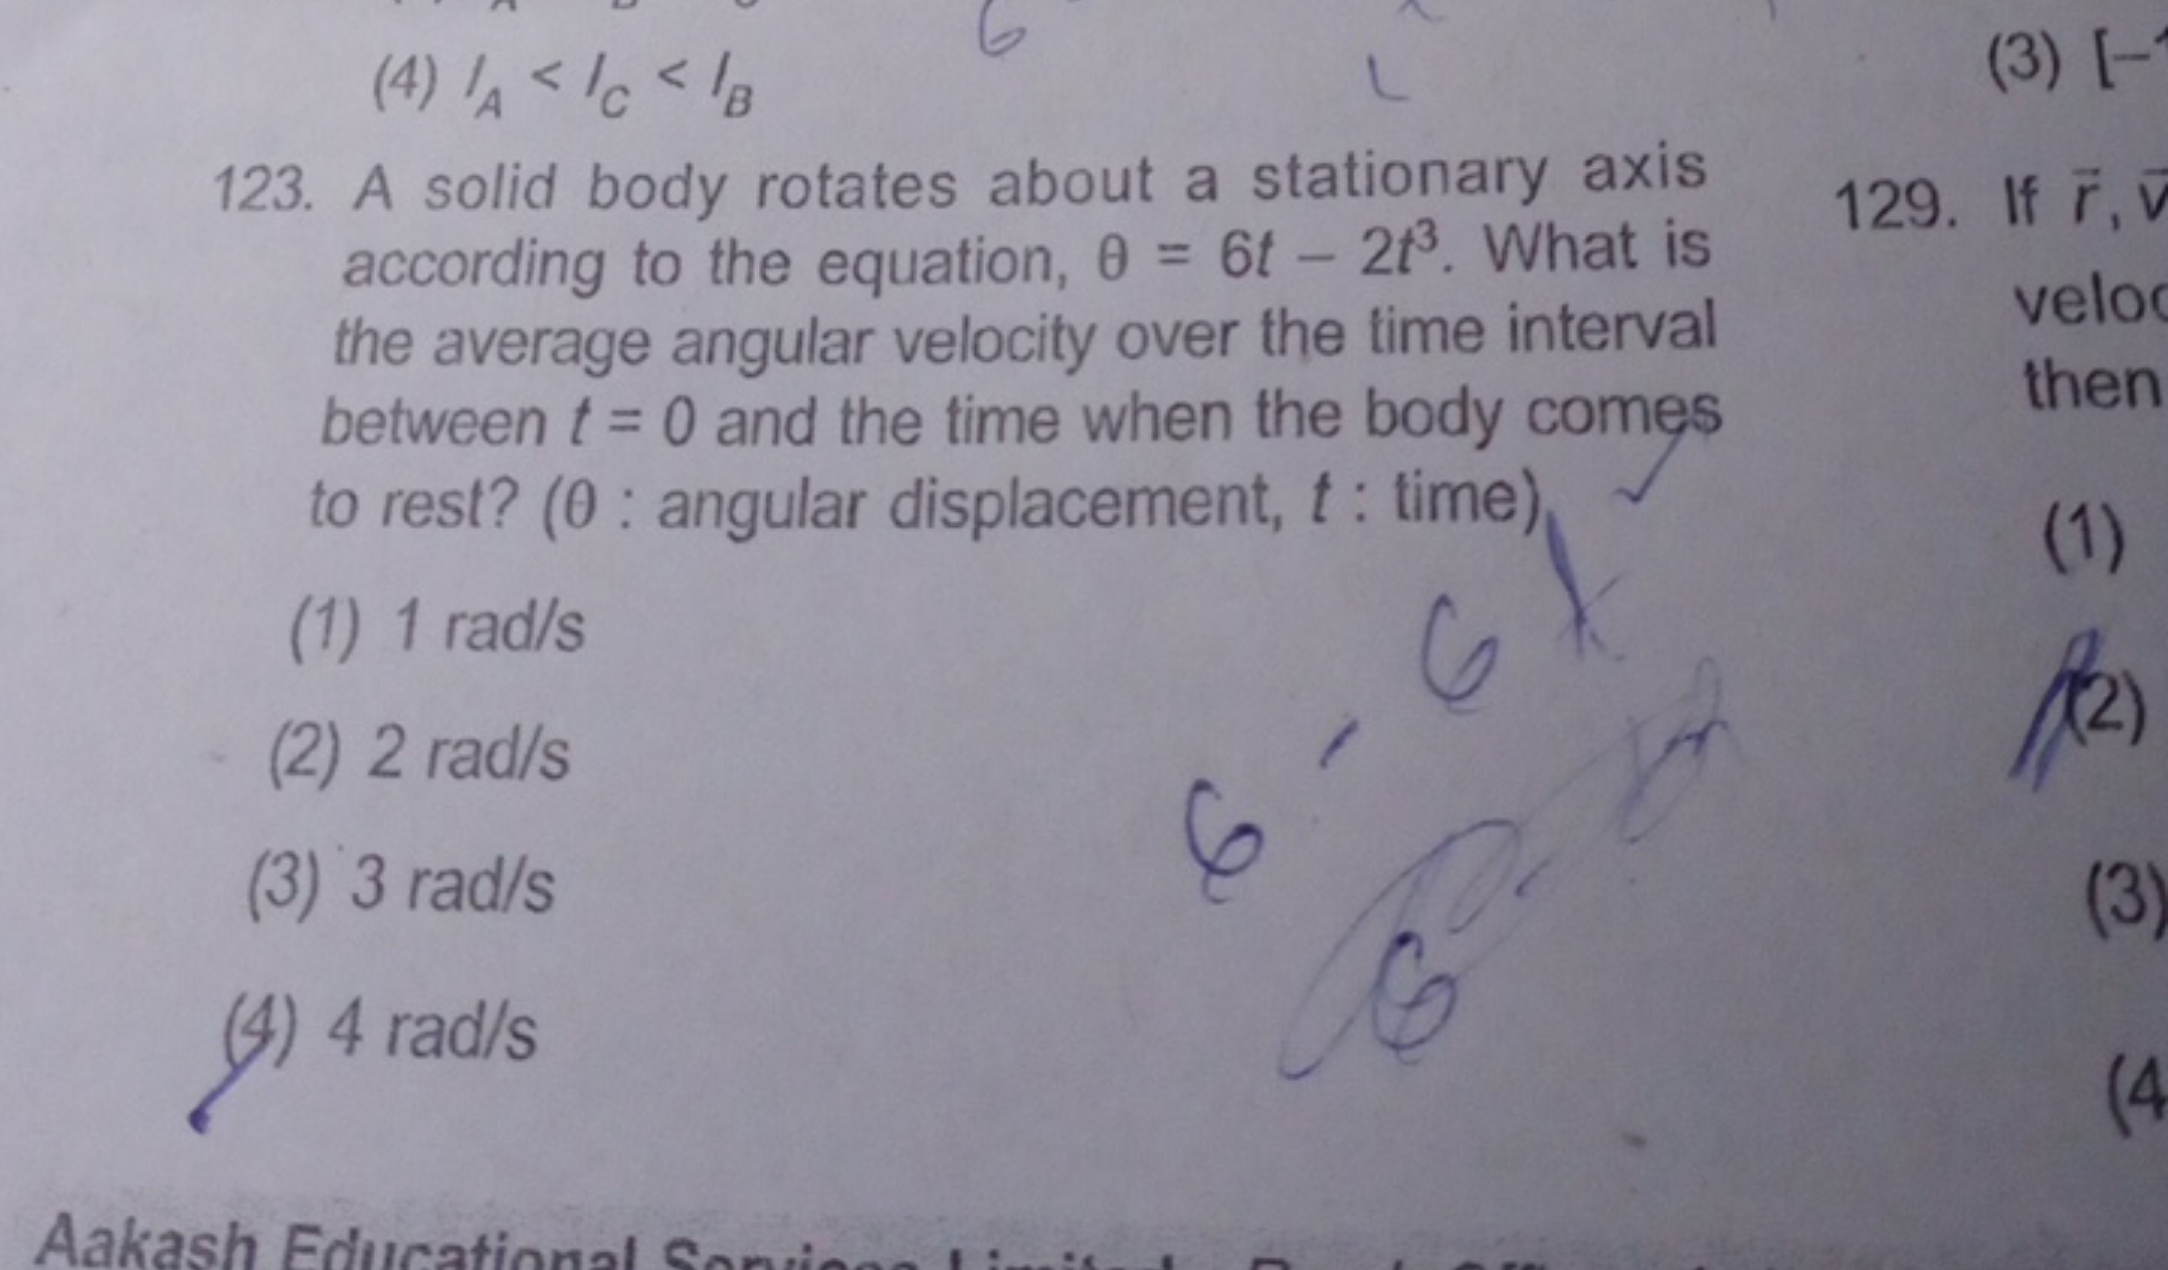 A solid body rotates about a stationary axis according to the equation